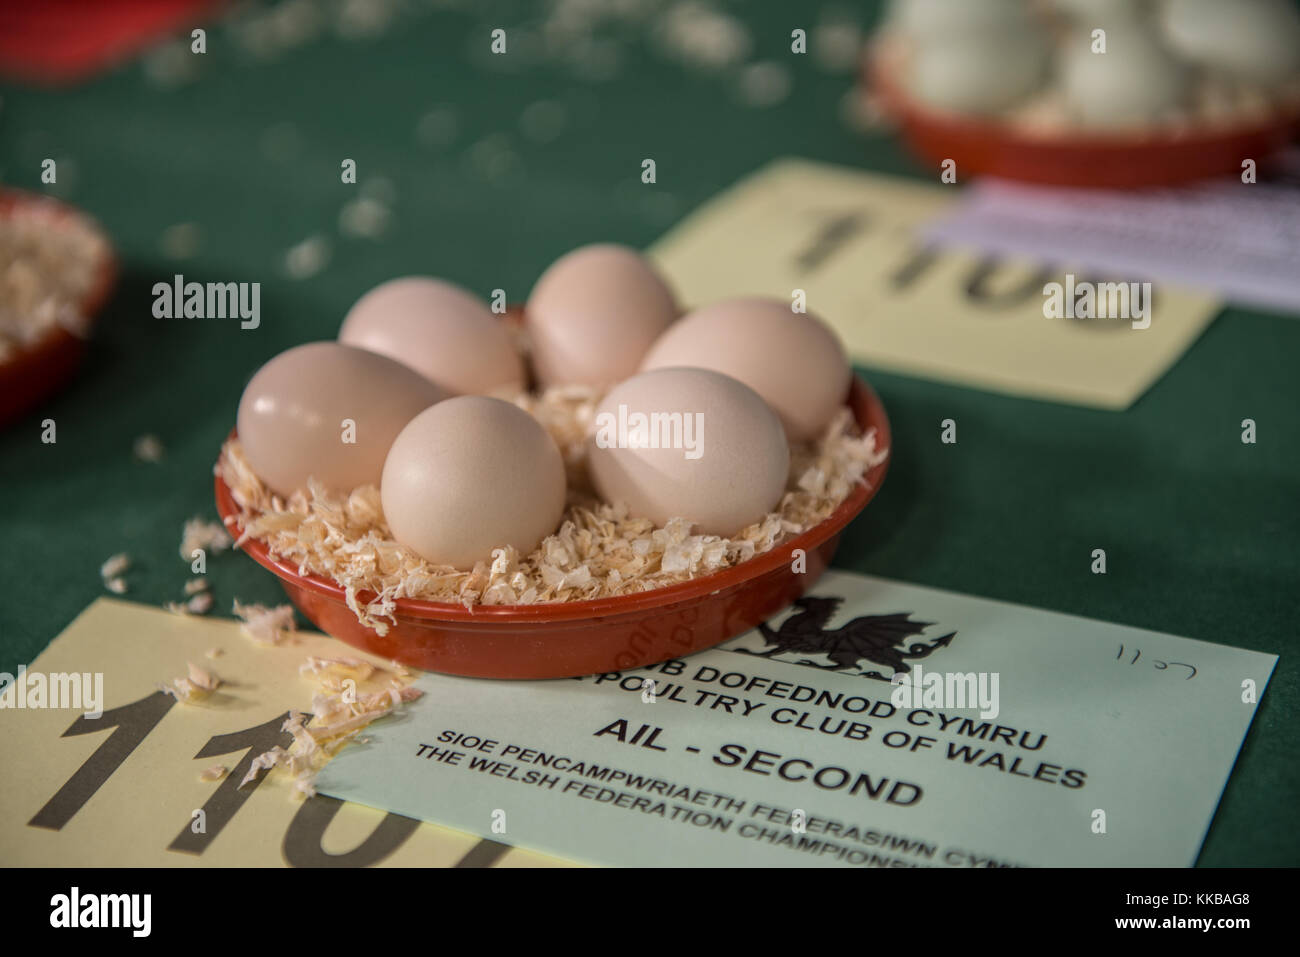 Eggs in presentation at a enthusiasts show at The Royal Welsh Showground, Builth Wells, Powys, Wales. UK. Stock Photo